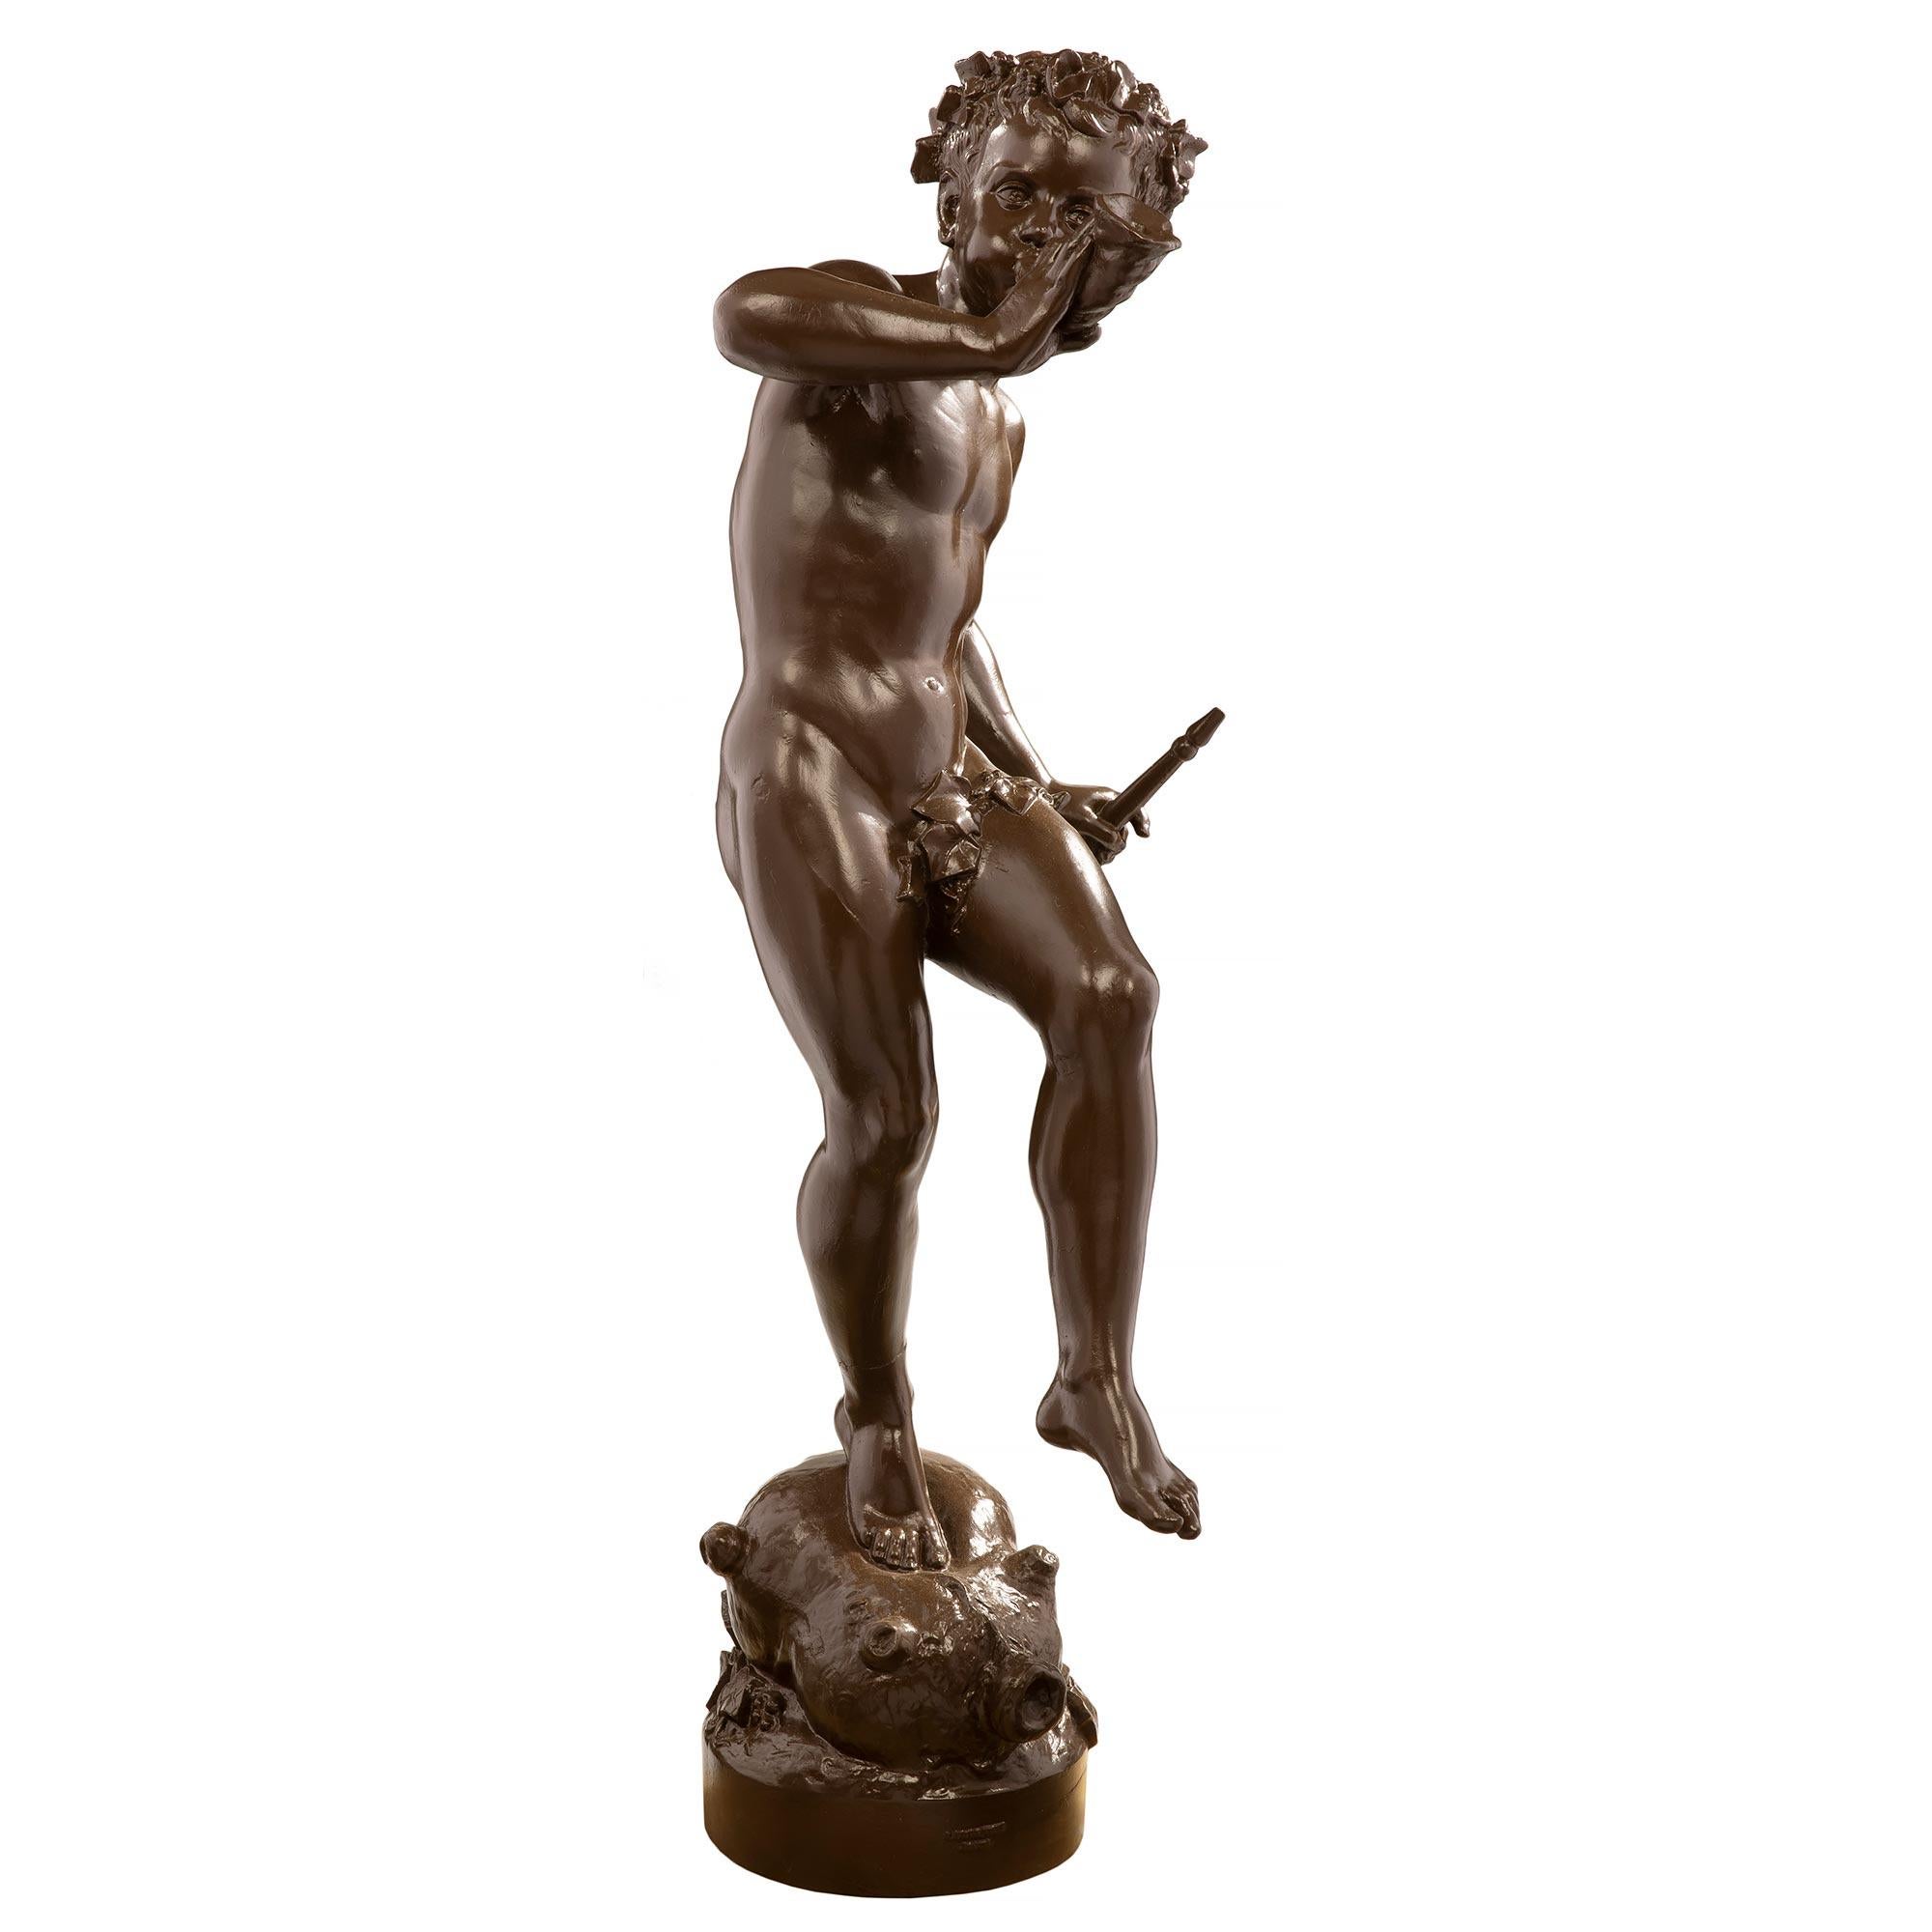 A charming and highly detailed French 19th century cast iron statue of a young boy playing the horn and holding a flute, signed 'A. DURENNE, Paris'. The statue is raised by a circular base and is standing on a bagpipe. The whimsical and joyous boy